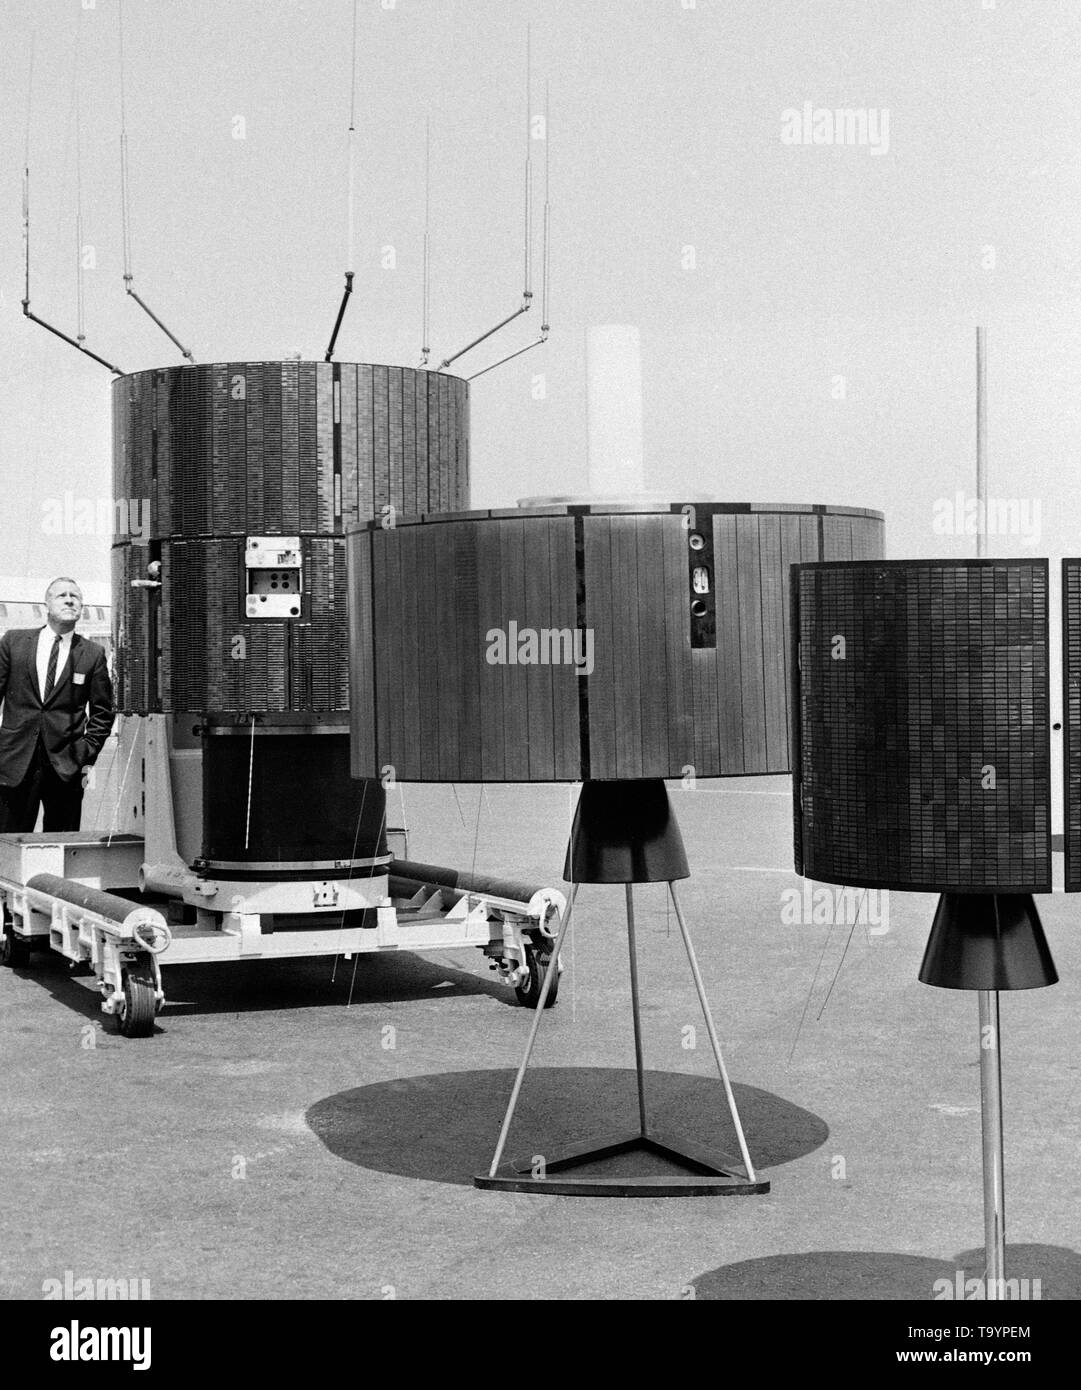 Shown here are replicas for the three satellites that are being used to bring live pictures and commentary from the Mexico Olympics to television audiences in Europe and Japan. The satellites are pictured at Hughes Aircraft Company, Culver City, California, where they were built for the National Aeronautics and Space Administration (NASA) and the Communications Satellite Corporation (Comsat). On left is NASA's Applications Technology Satellite (ATS-3) which, over the east coast of Brazil, is transmitting the picture to Europe while voice commentary of the European telecast in a dozen languages Stock Photo